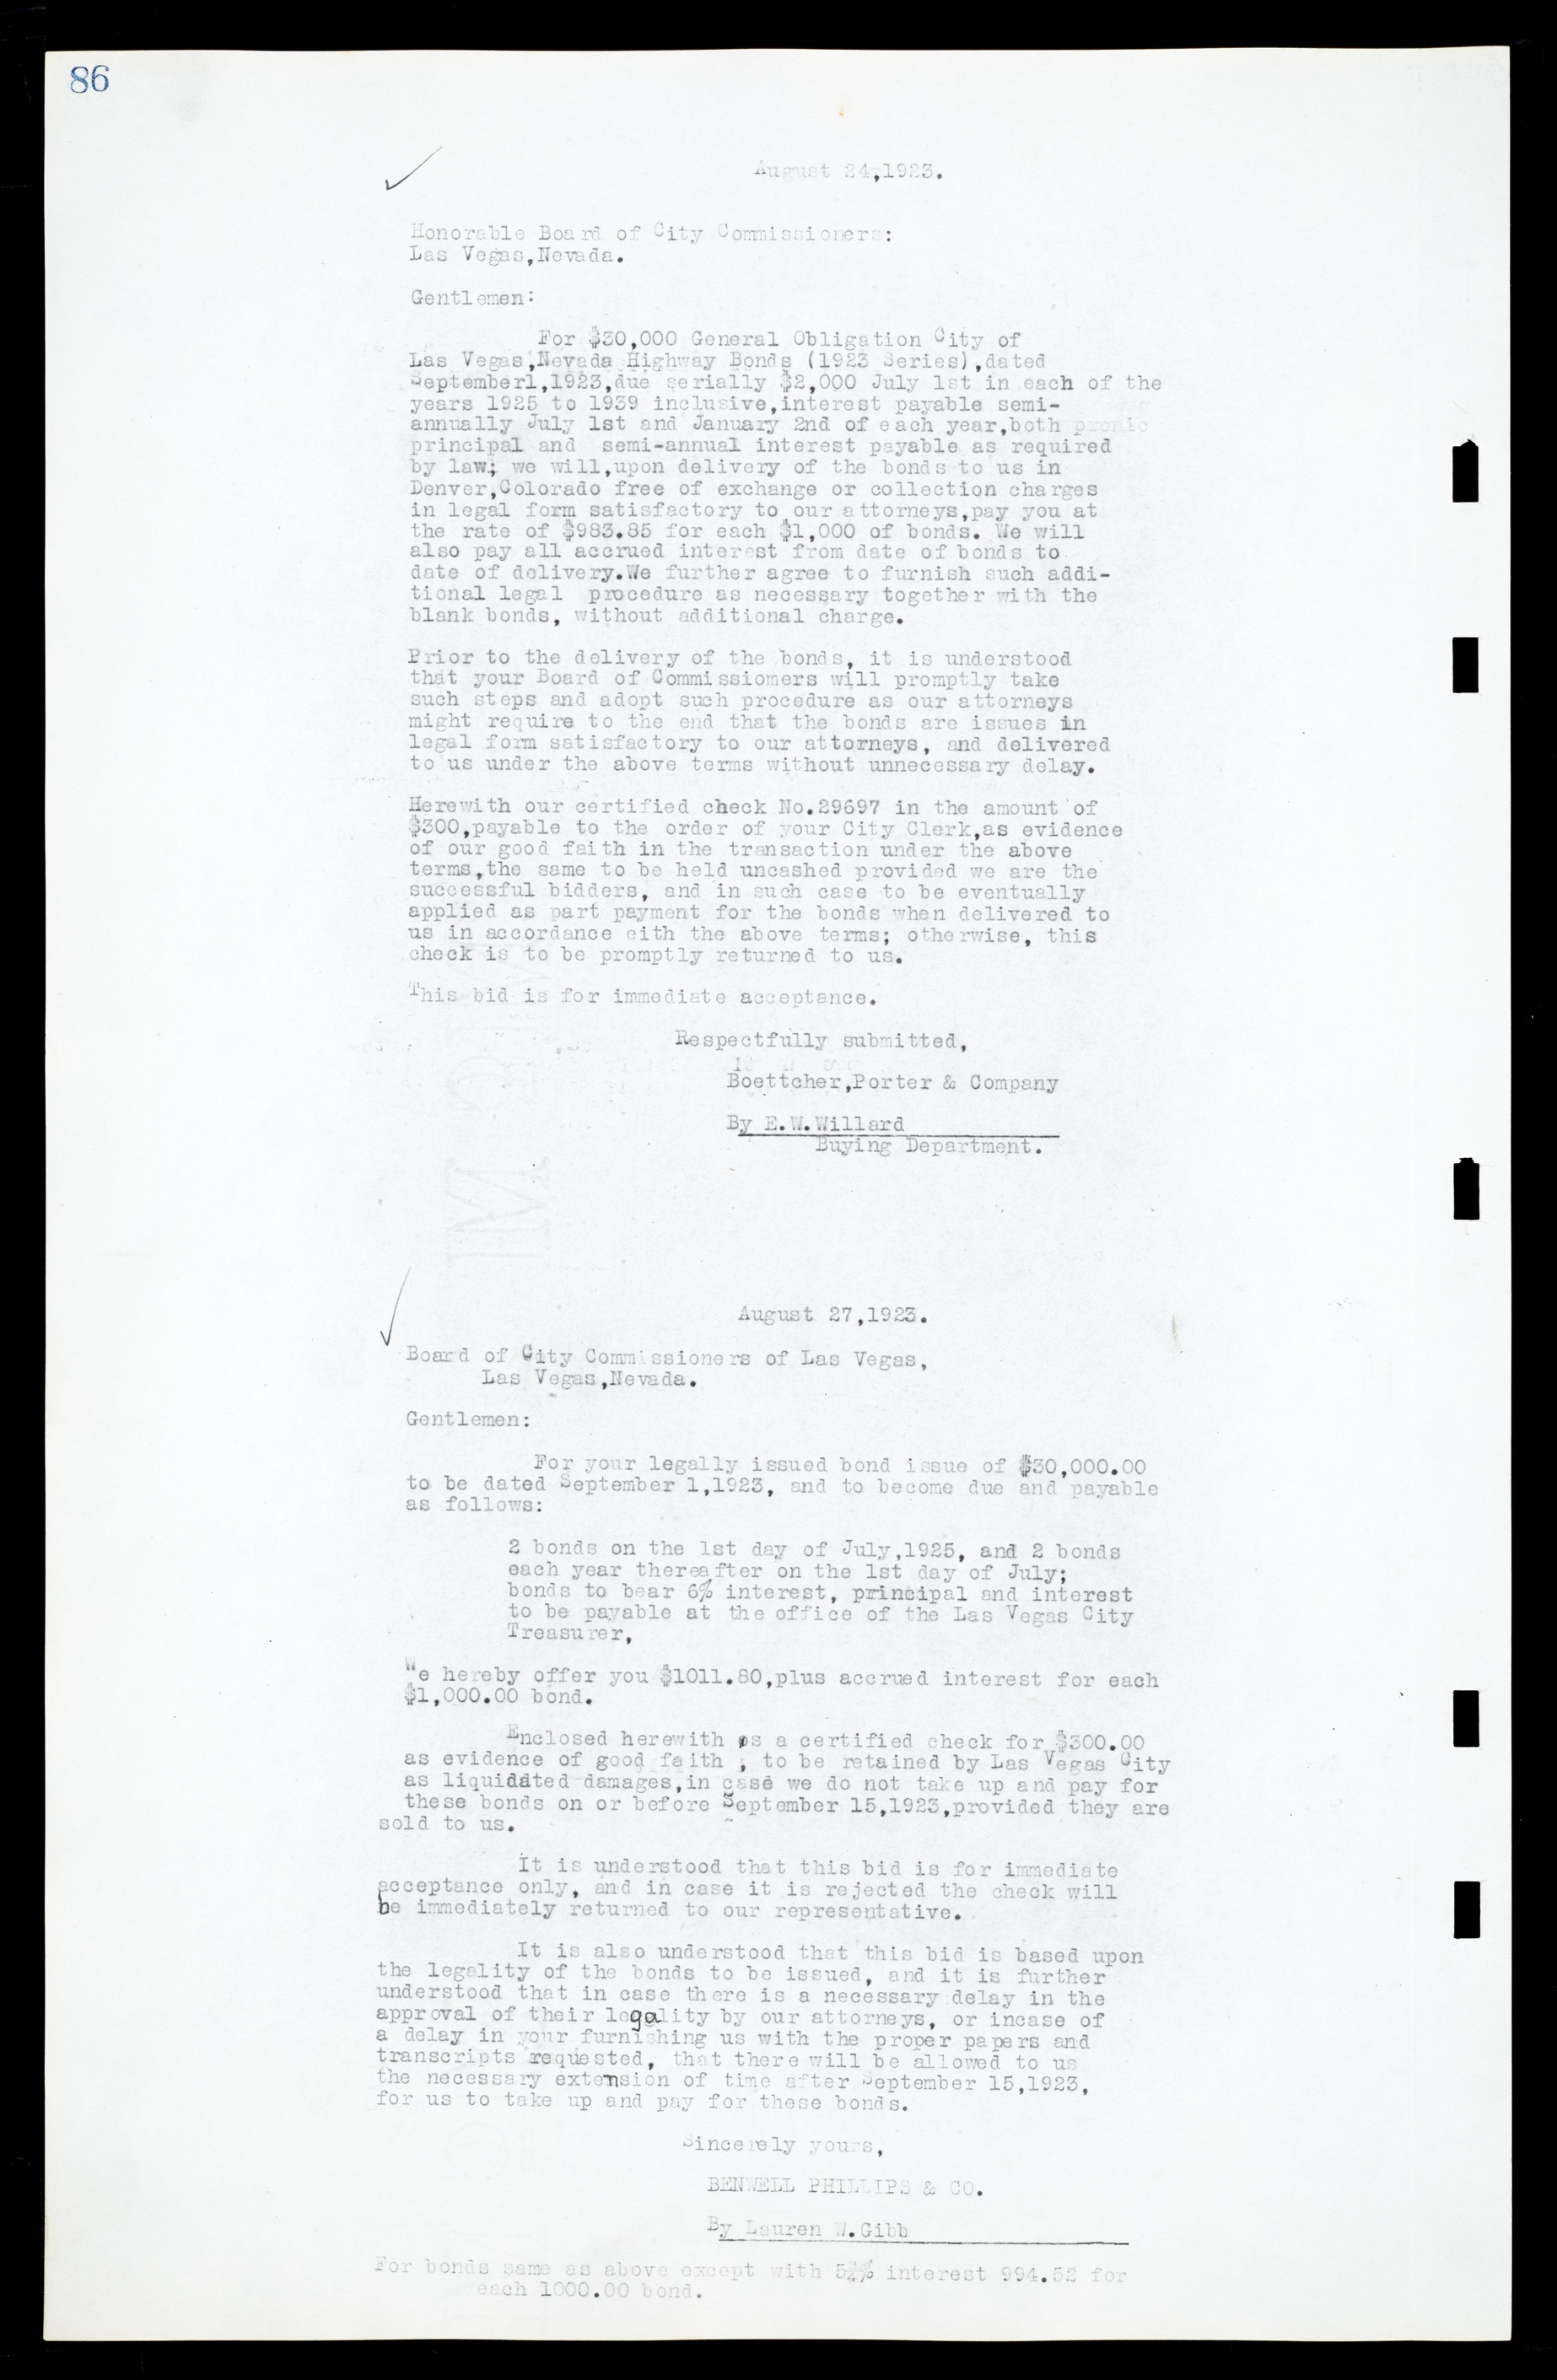 Las Vegas City Commission Minutes, March 1, 1922 to May 10, 1929, lvc000002-93